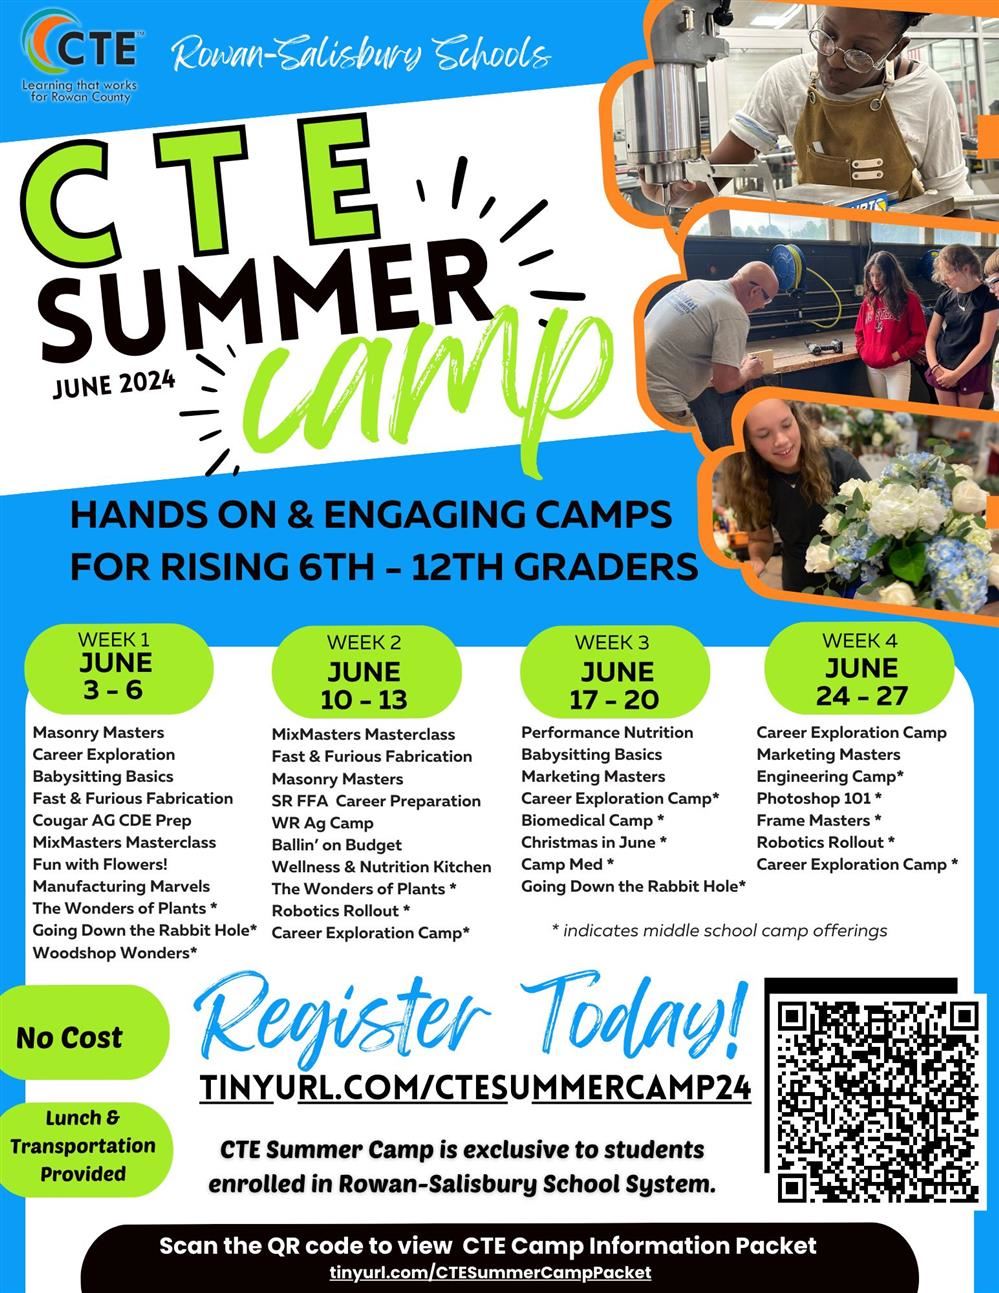  Infographic for CTE Summer Camp